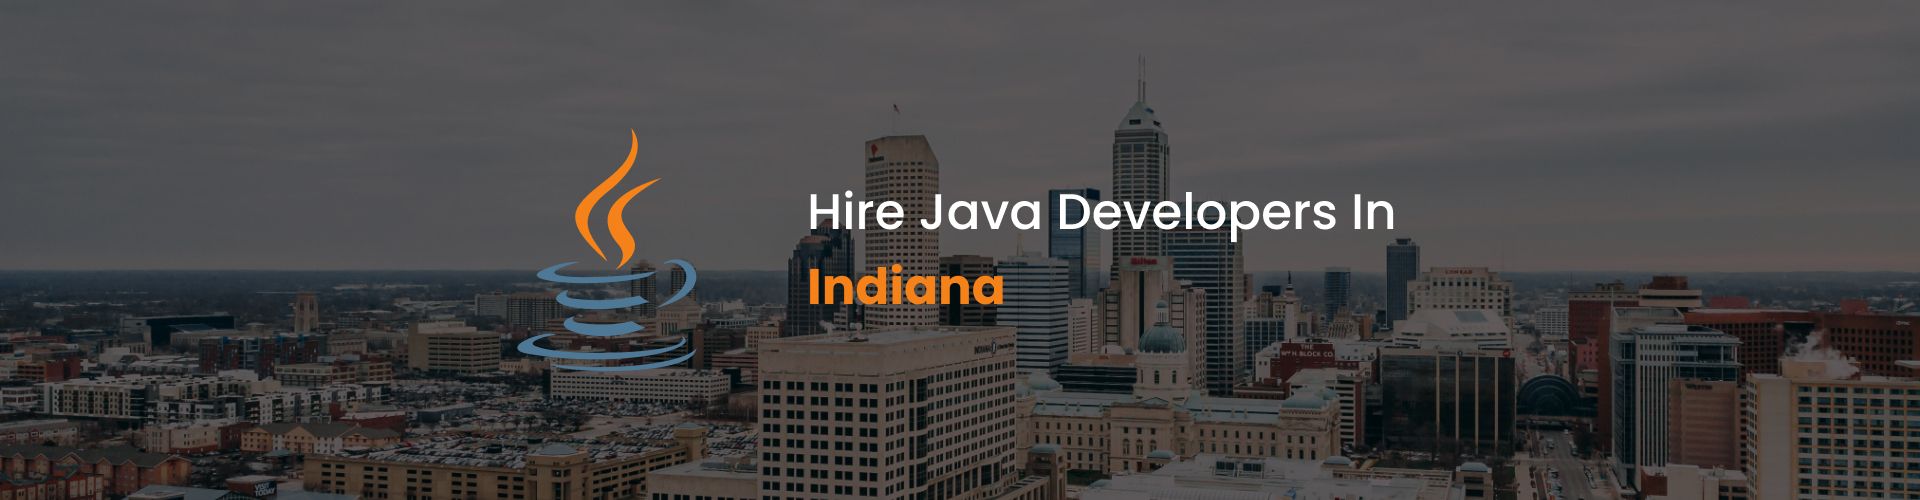 hire java developers in indiana